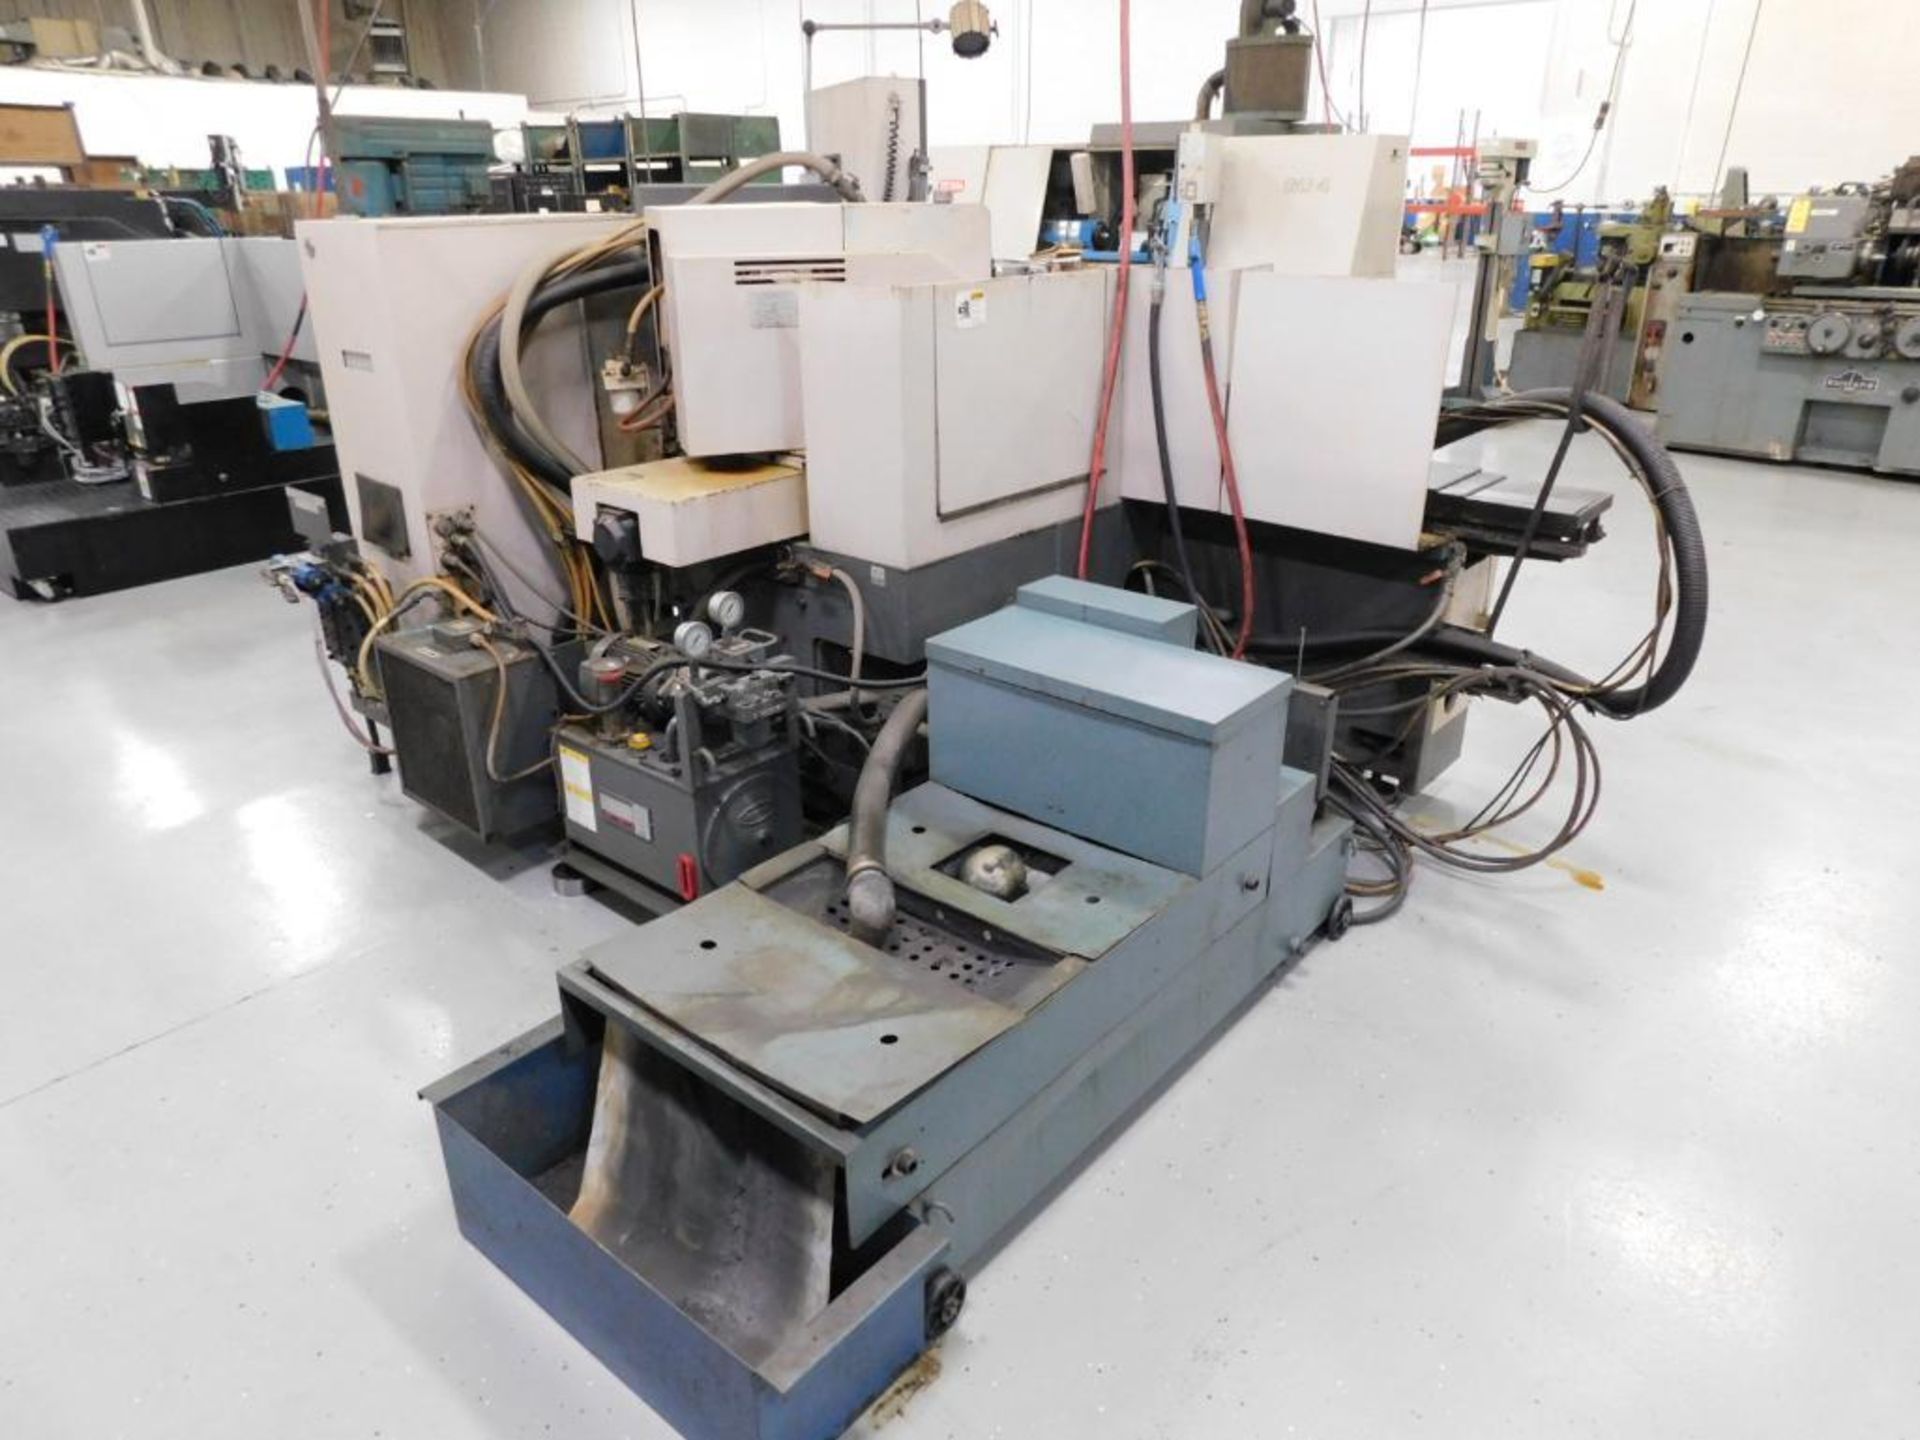 1998 Toyoda GL 4A-100E CNC Universal Cylindrical Grinder, Toyoda GC 32 Control, 12.6" Swing, 16" x 3 - Image 6 of 10